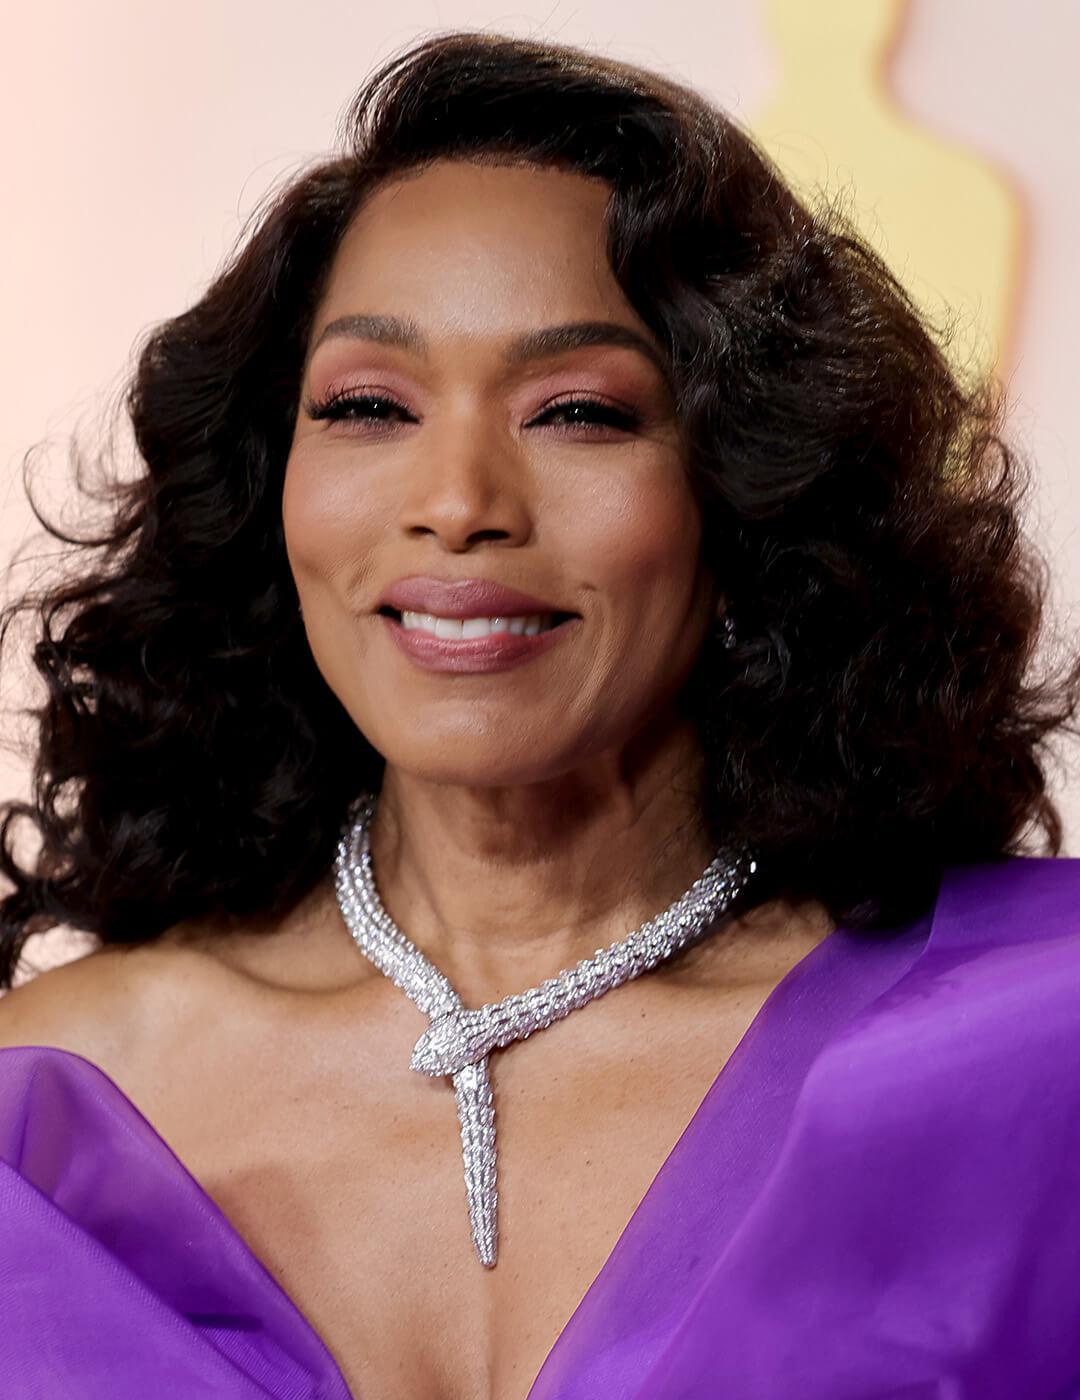 A photo of Angela Bassett with a long layered hairstyle and wearing a purple dress